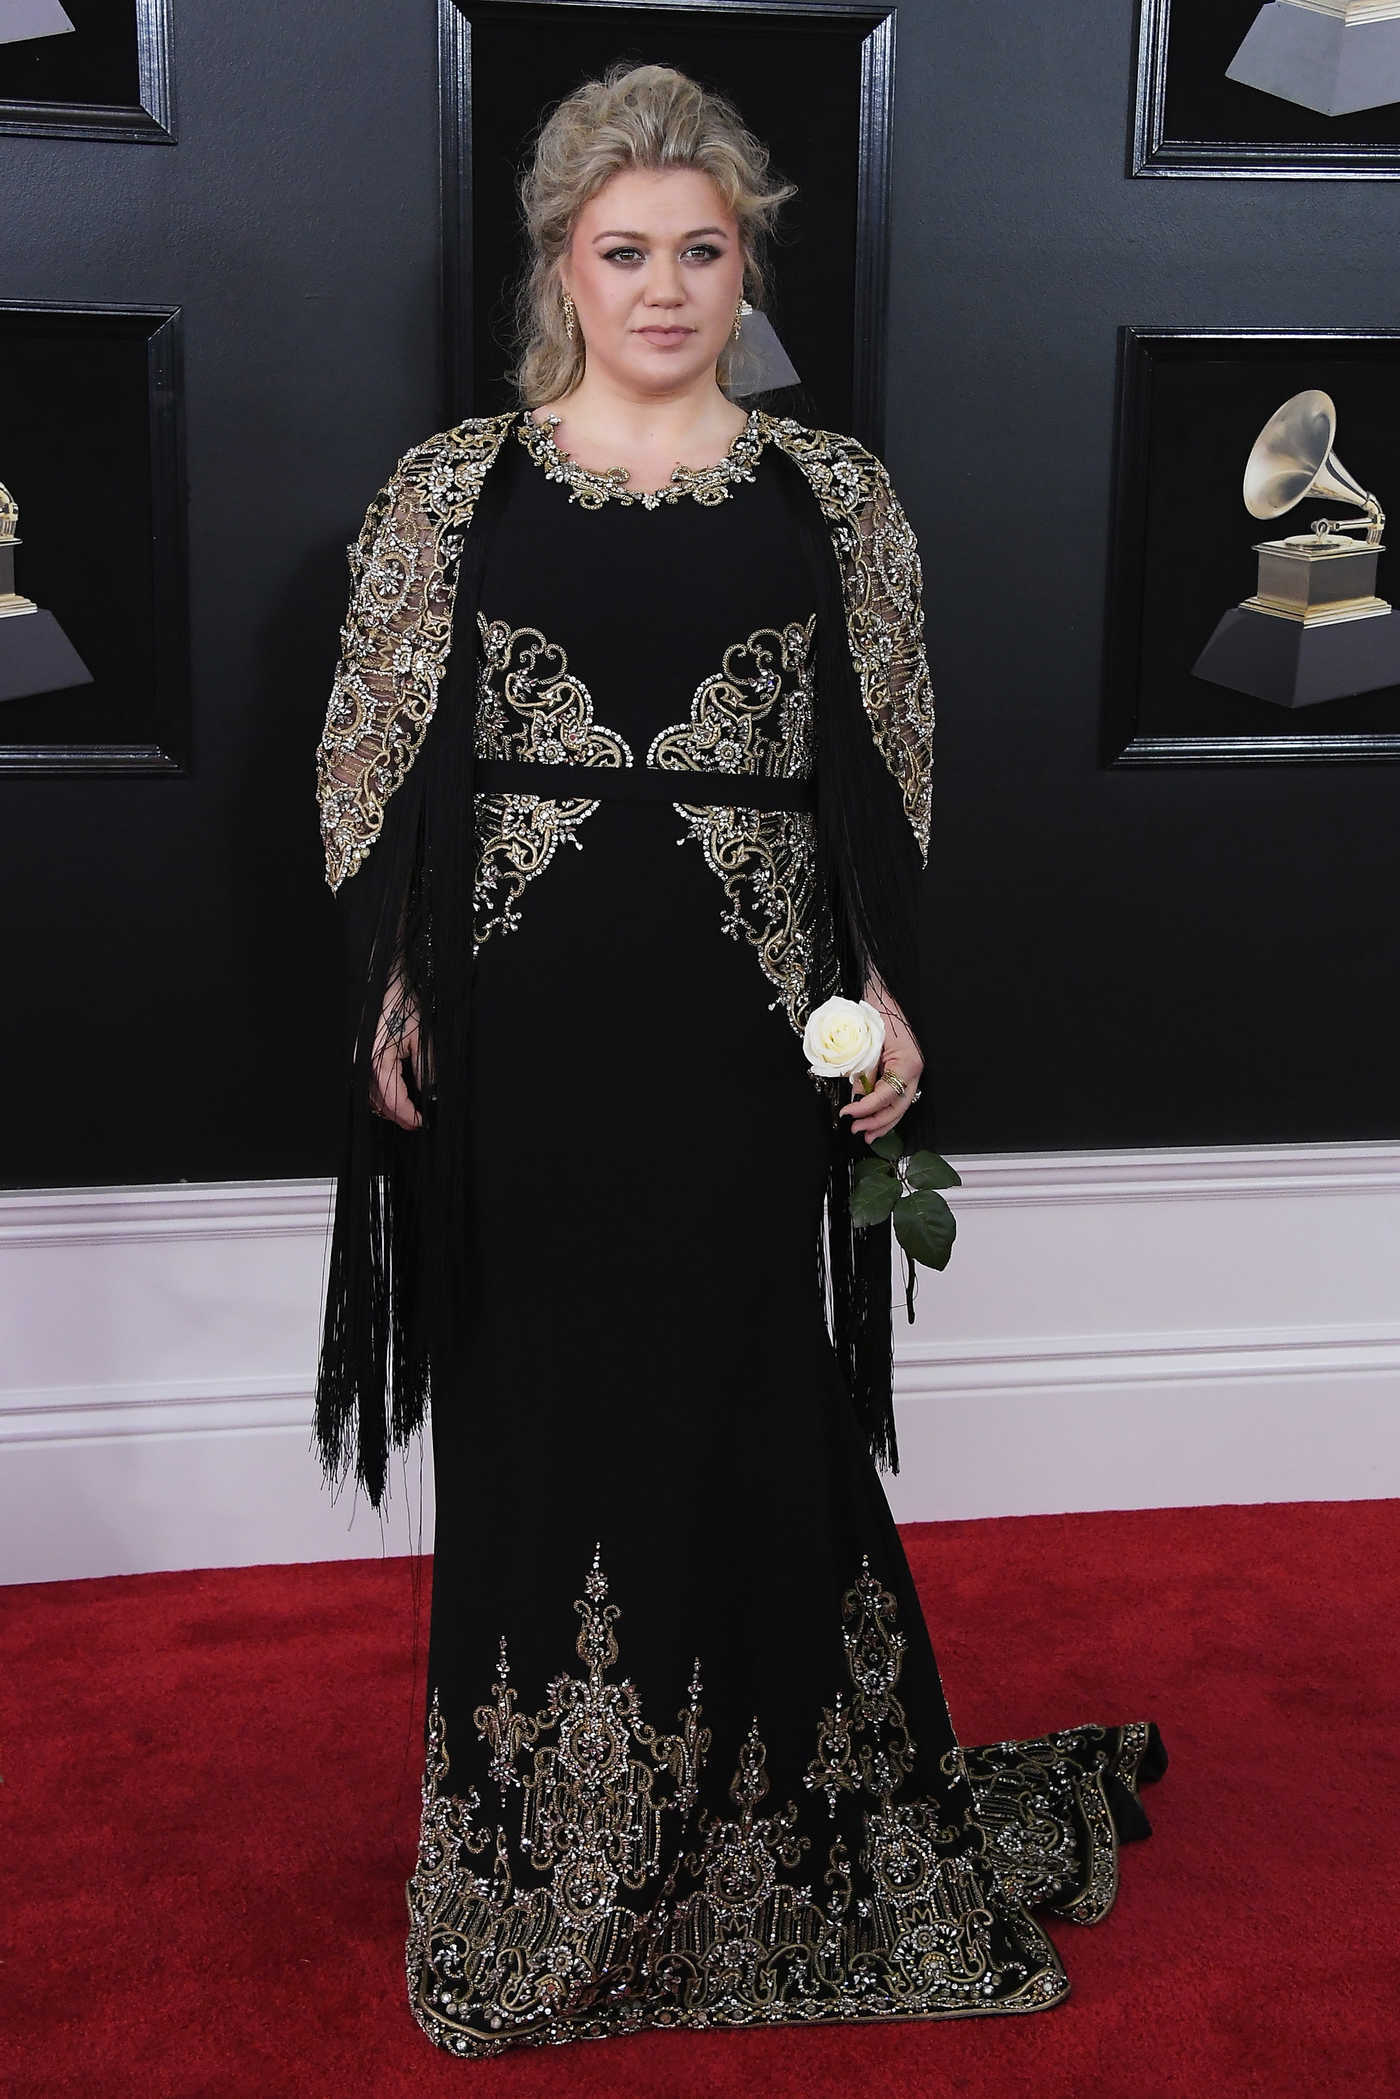 Kelly Clarkson at the 60th Annual Grammy Awards at Madison Square Garden in New York City 01/28/2018